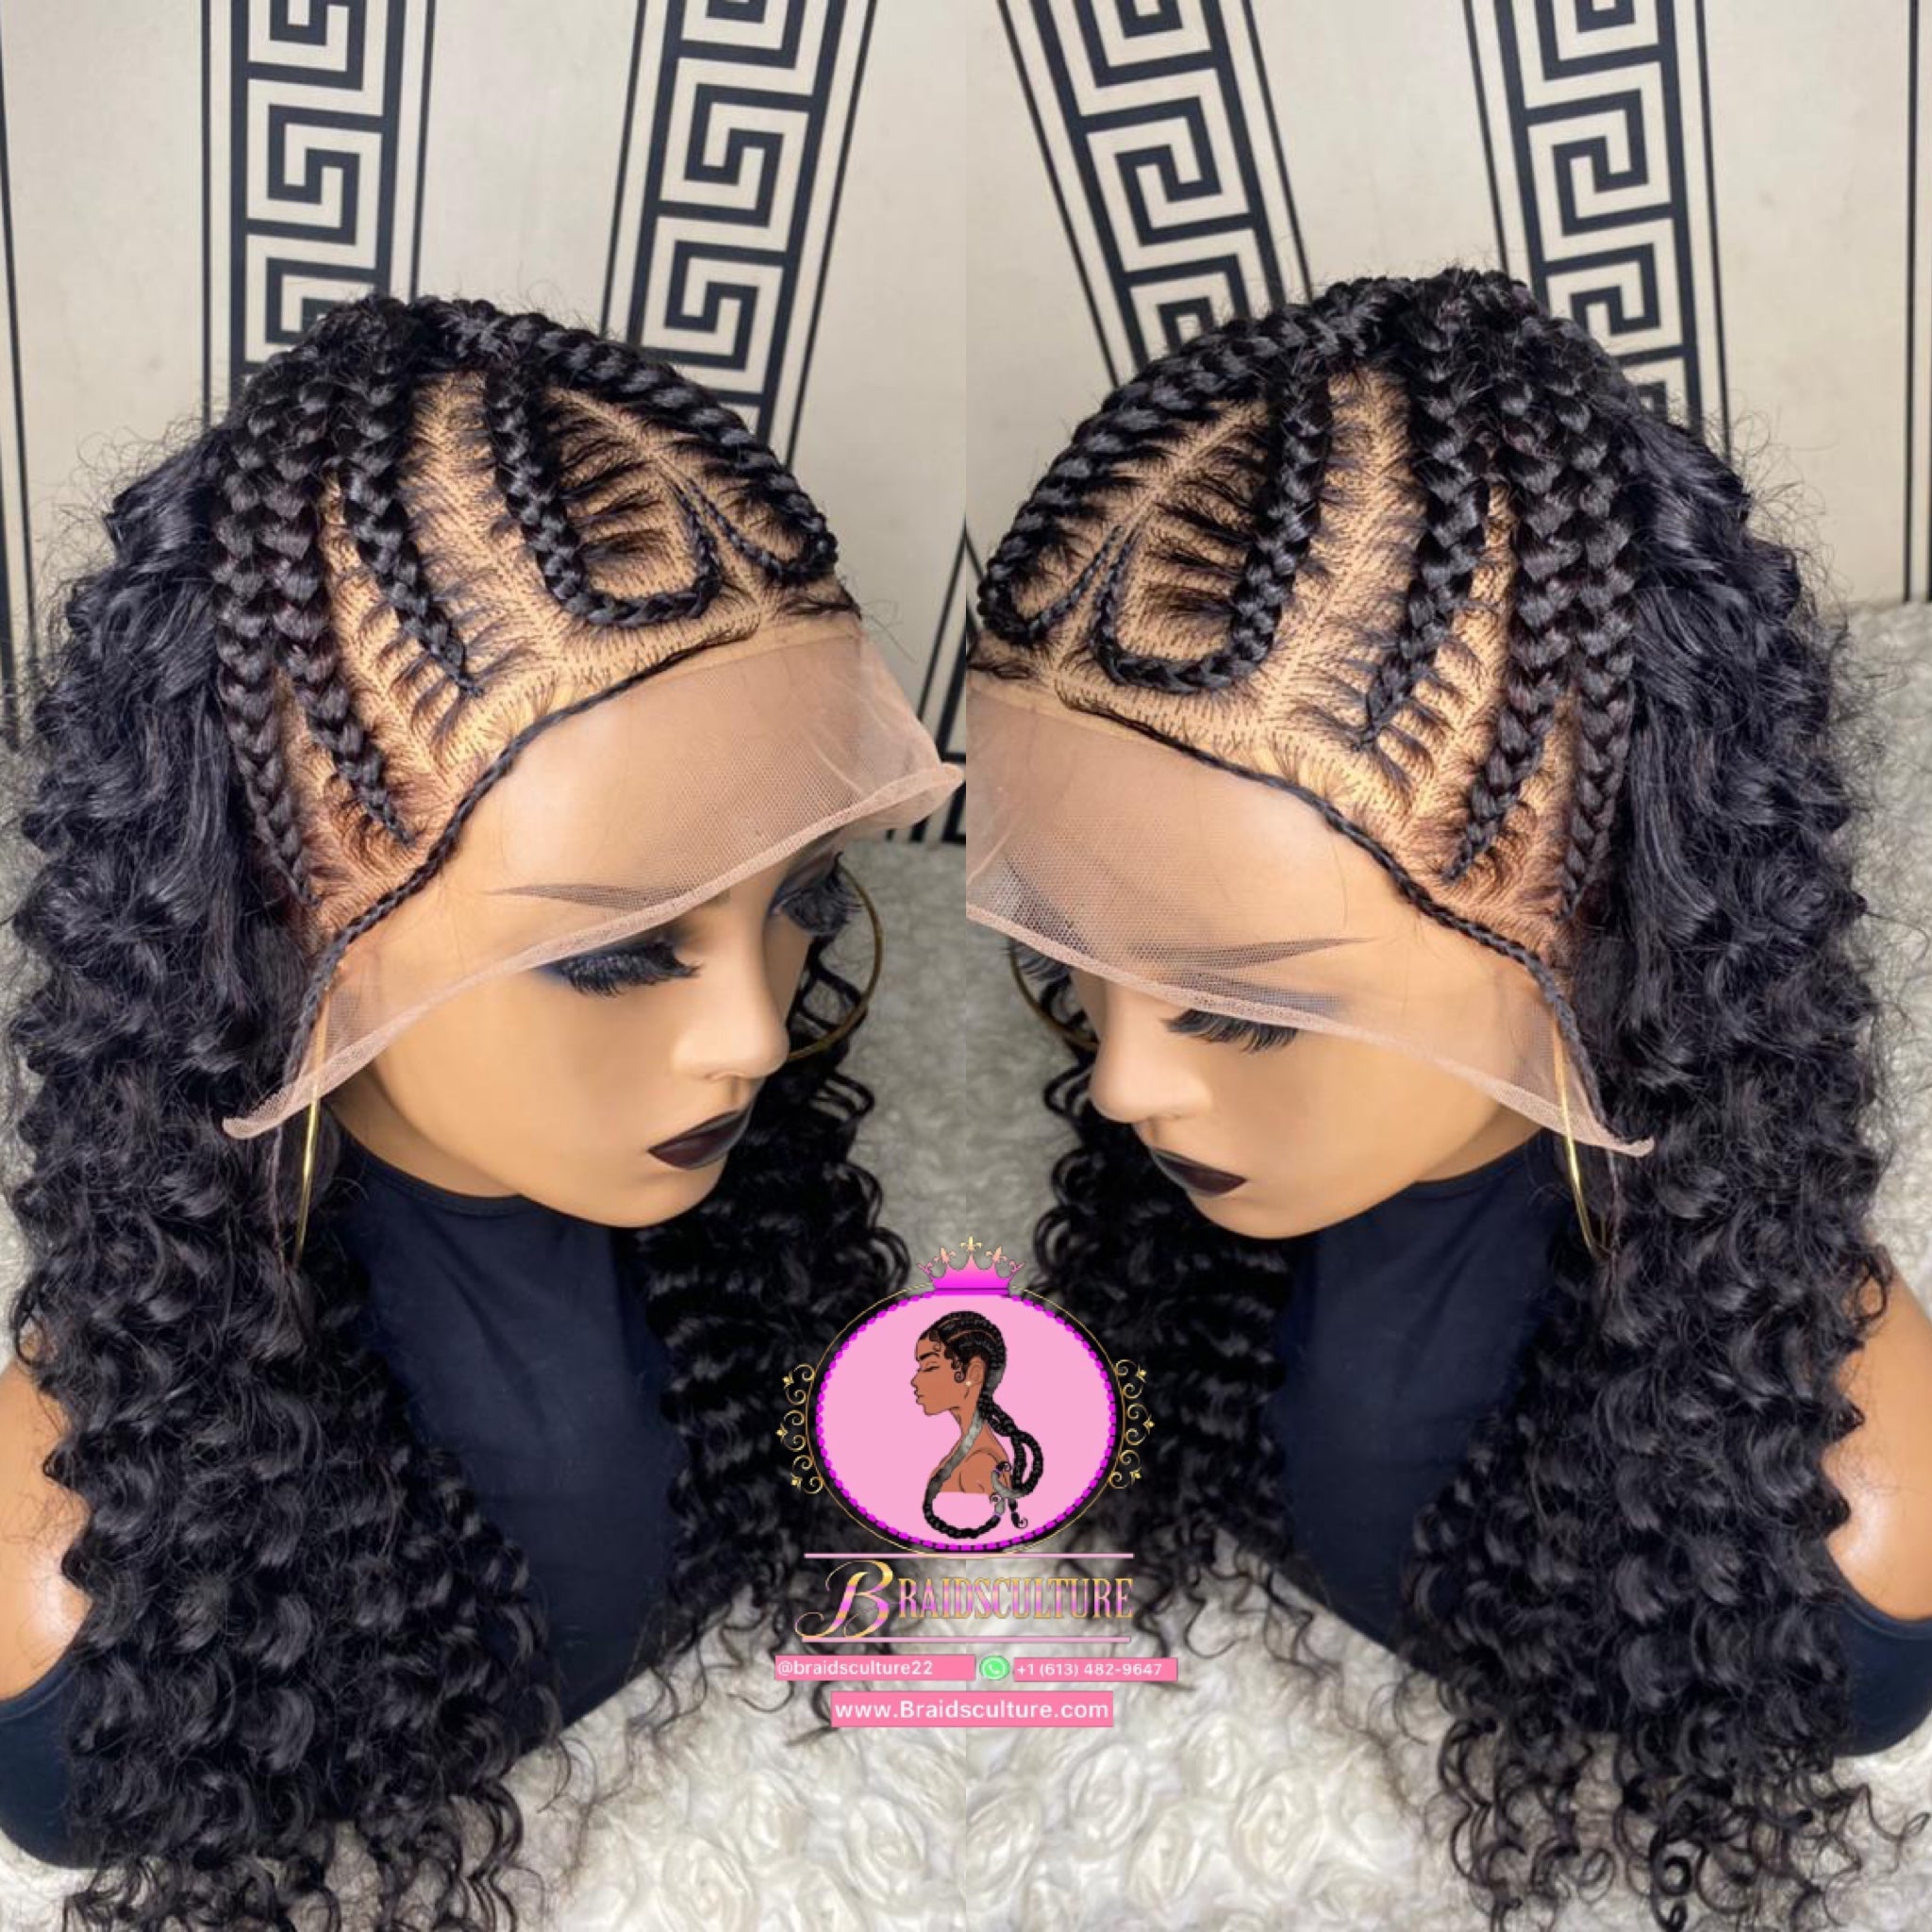 Goddess Braids Deep Wave Lace Frontal Wig Braided Half Up, 43% OFF